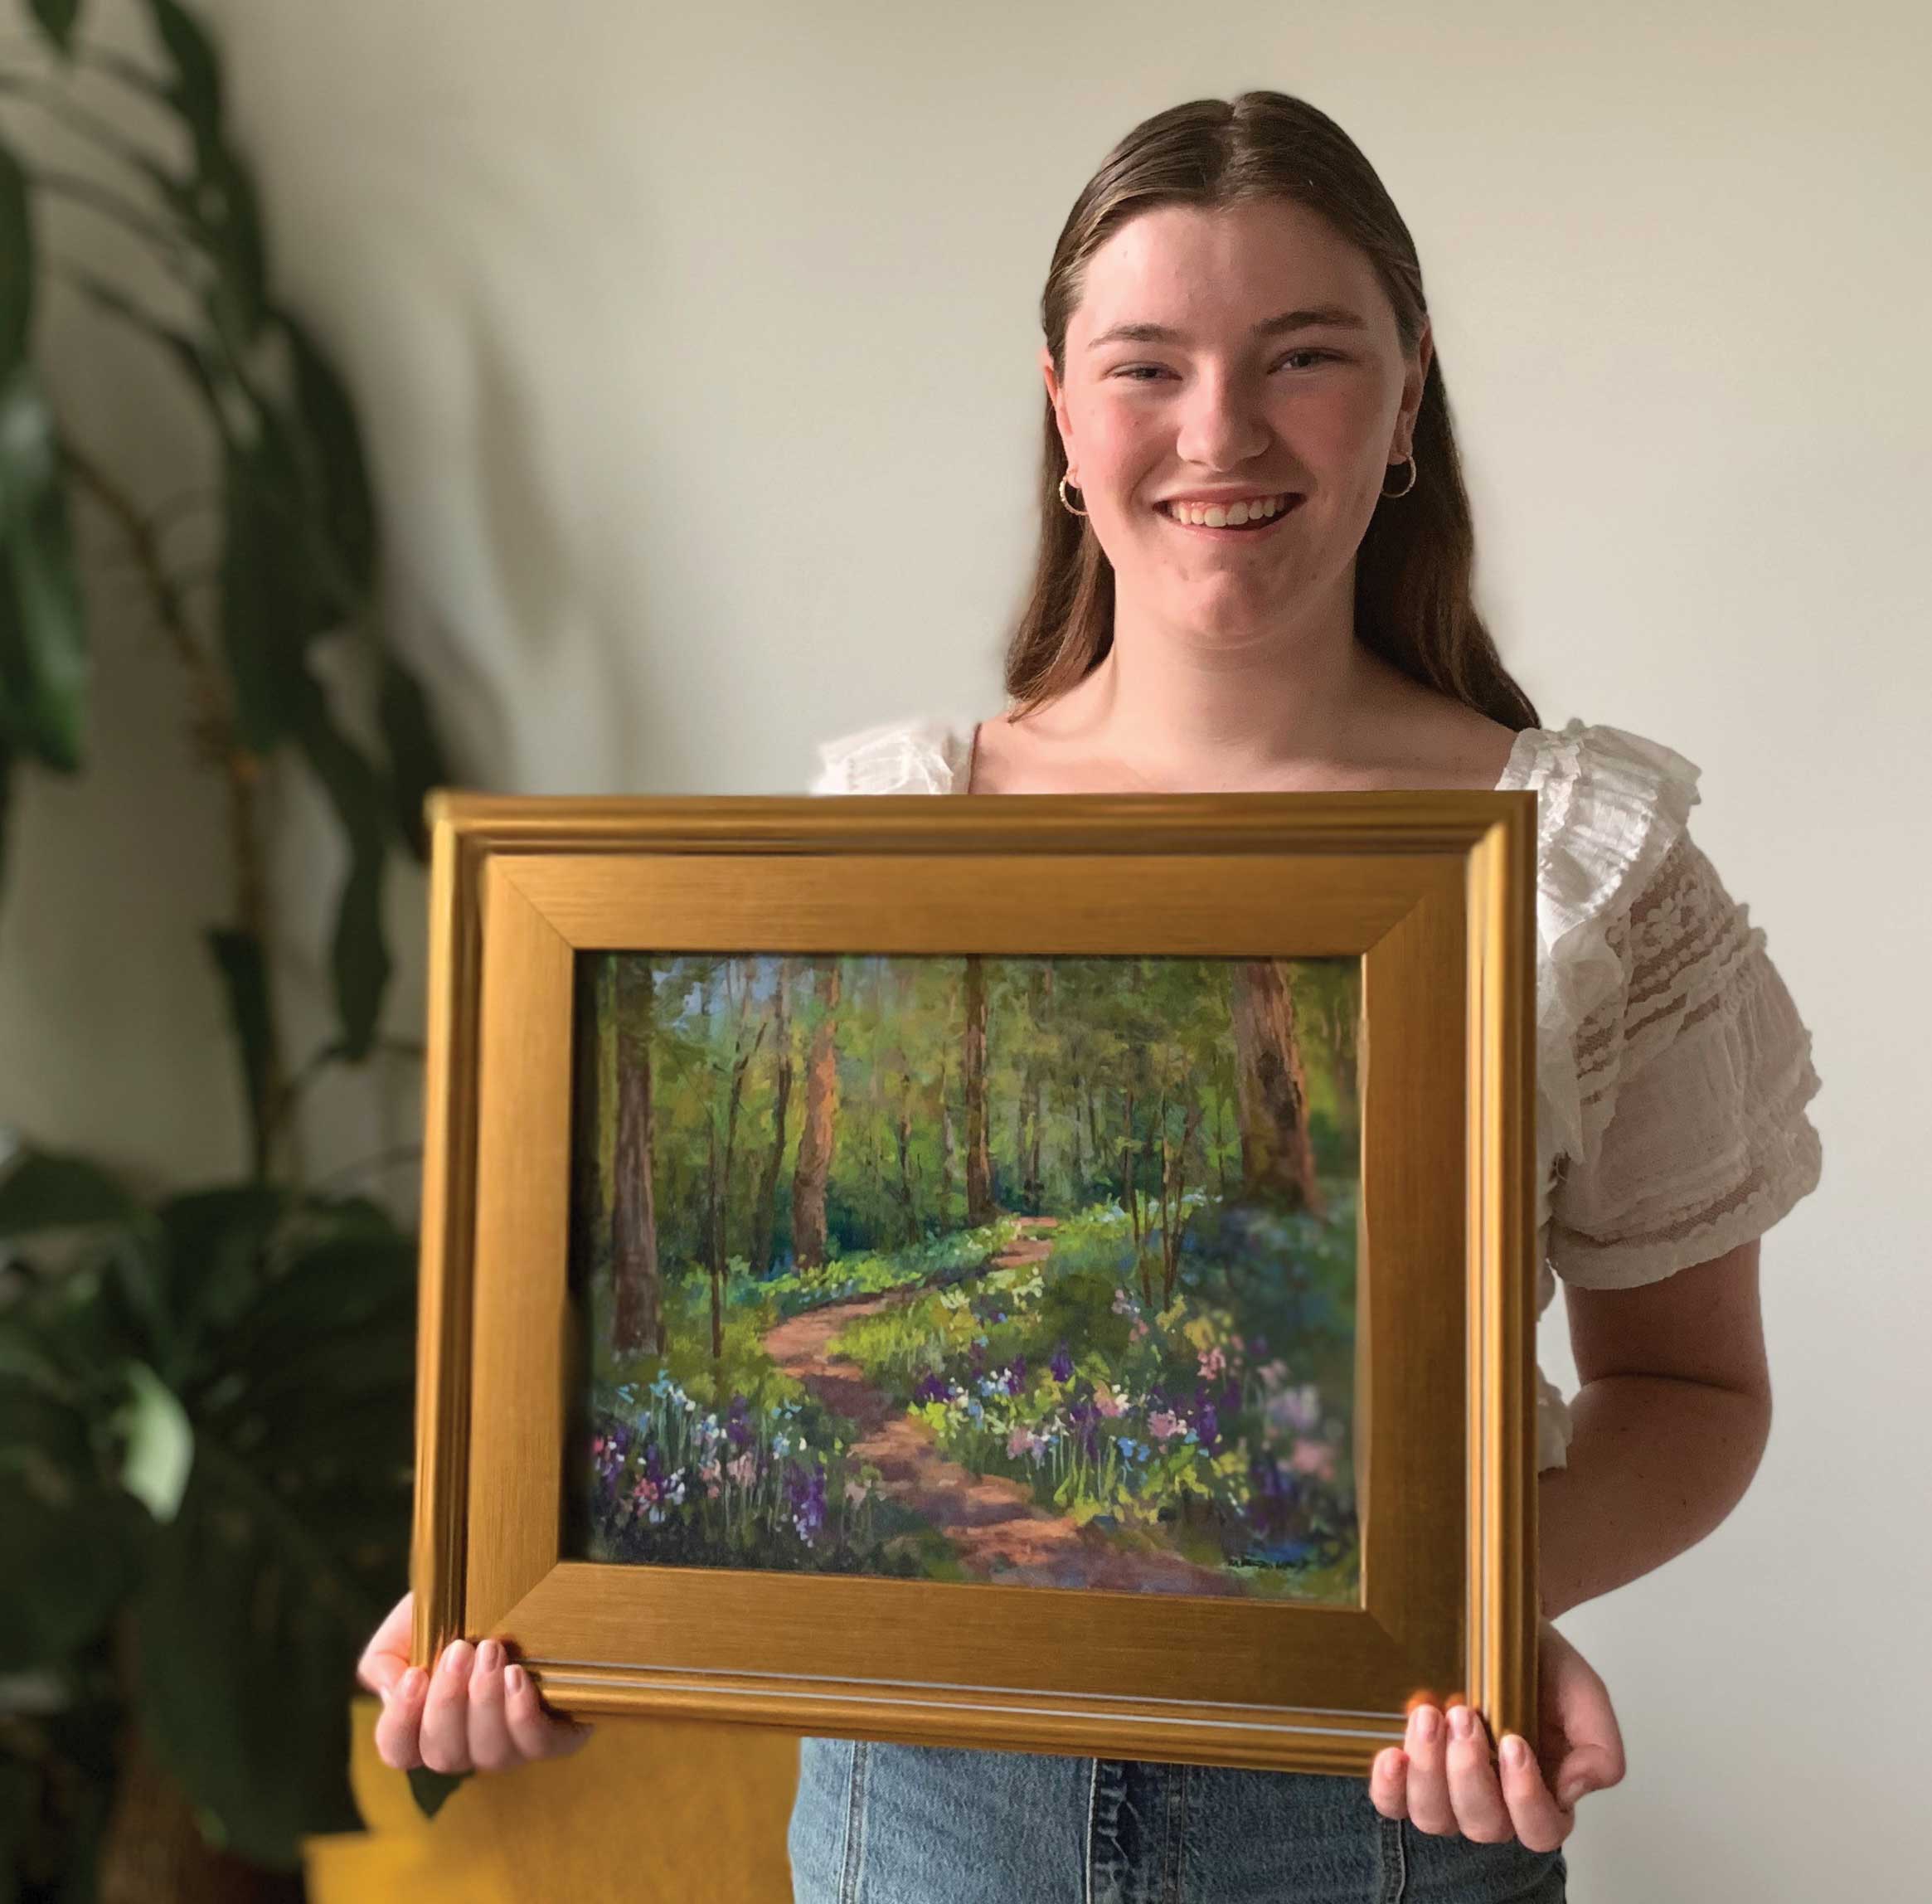 My daughter Brenna with her first painting purchase